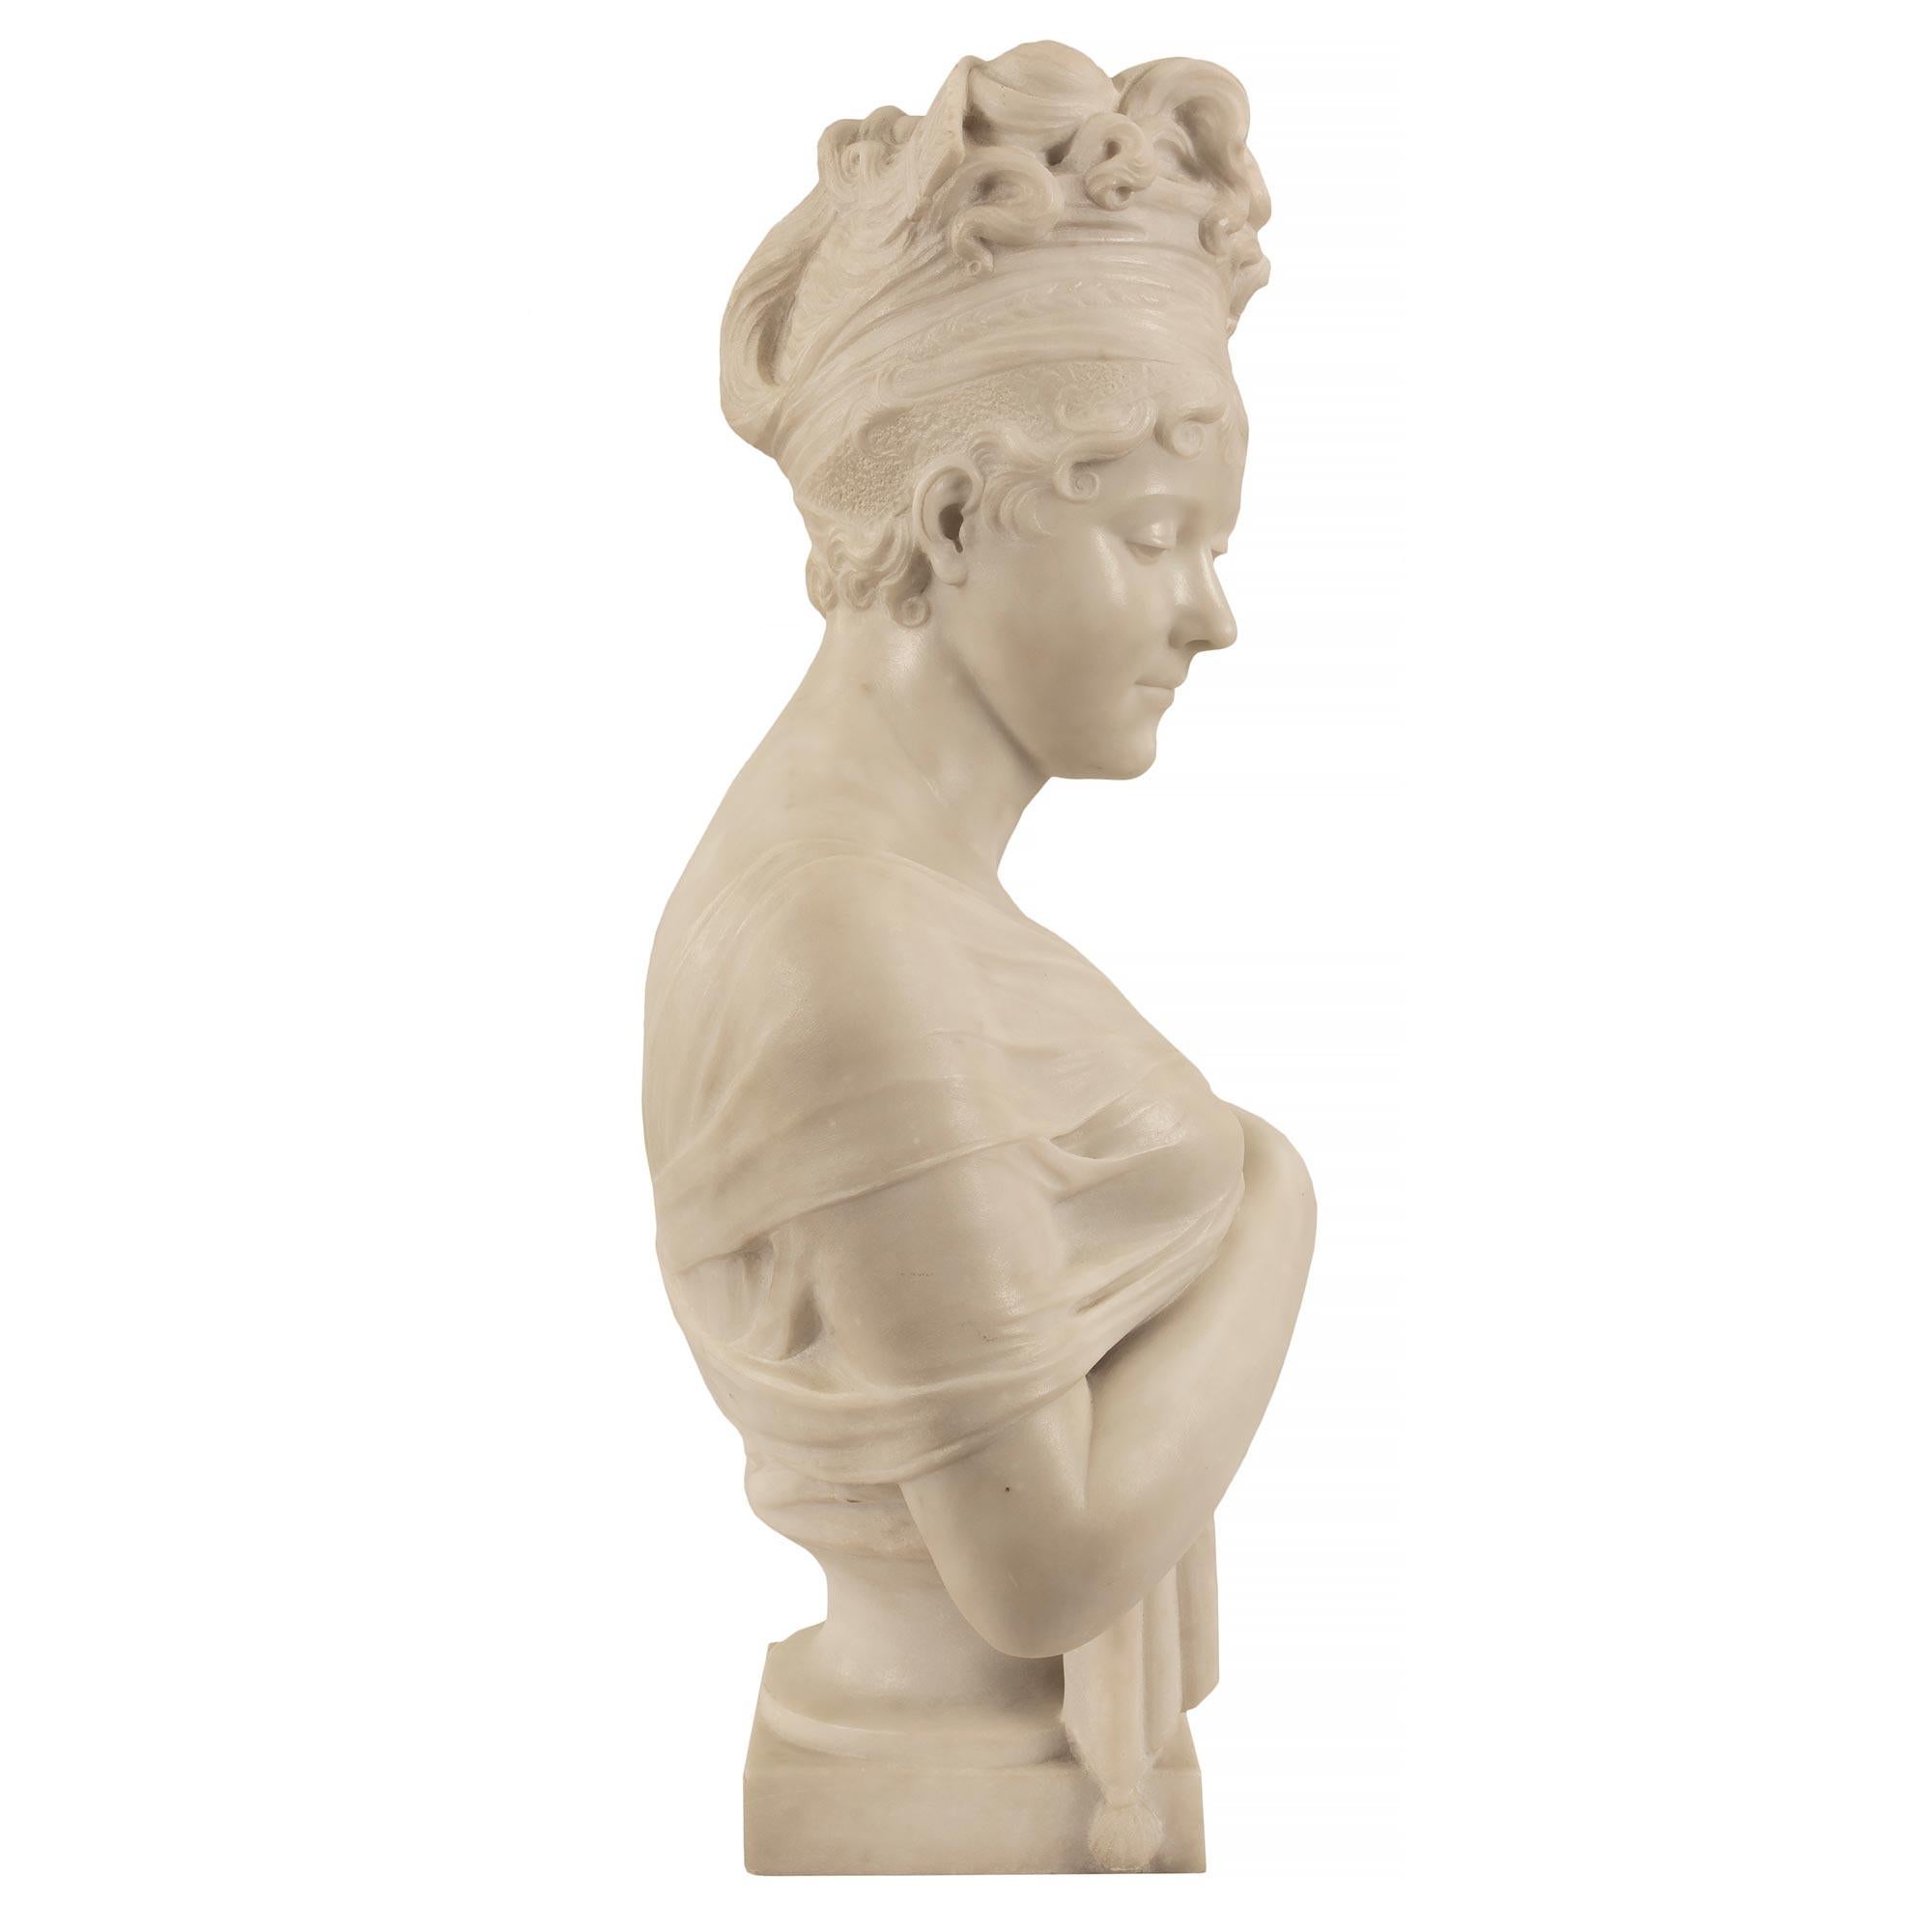 Italian 19th Century Neoclassical St. Carrara Marble Bust of Juliette Recamier For Sale 1